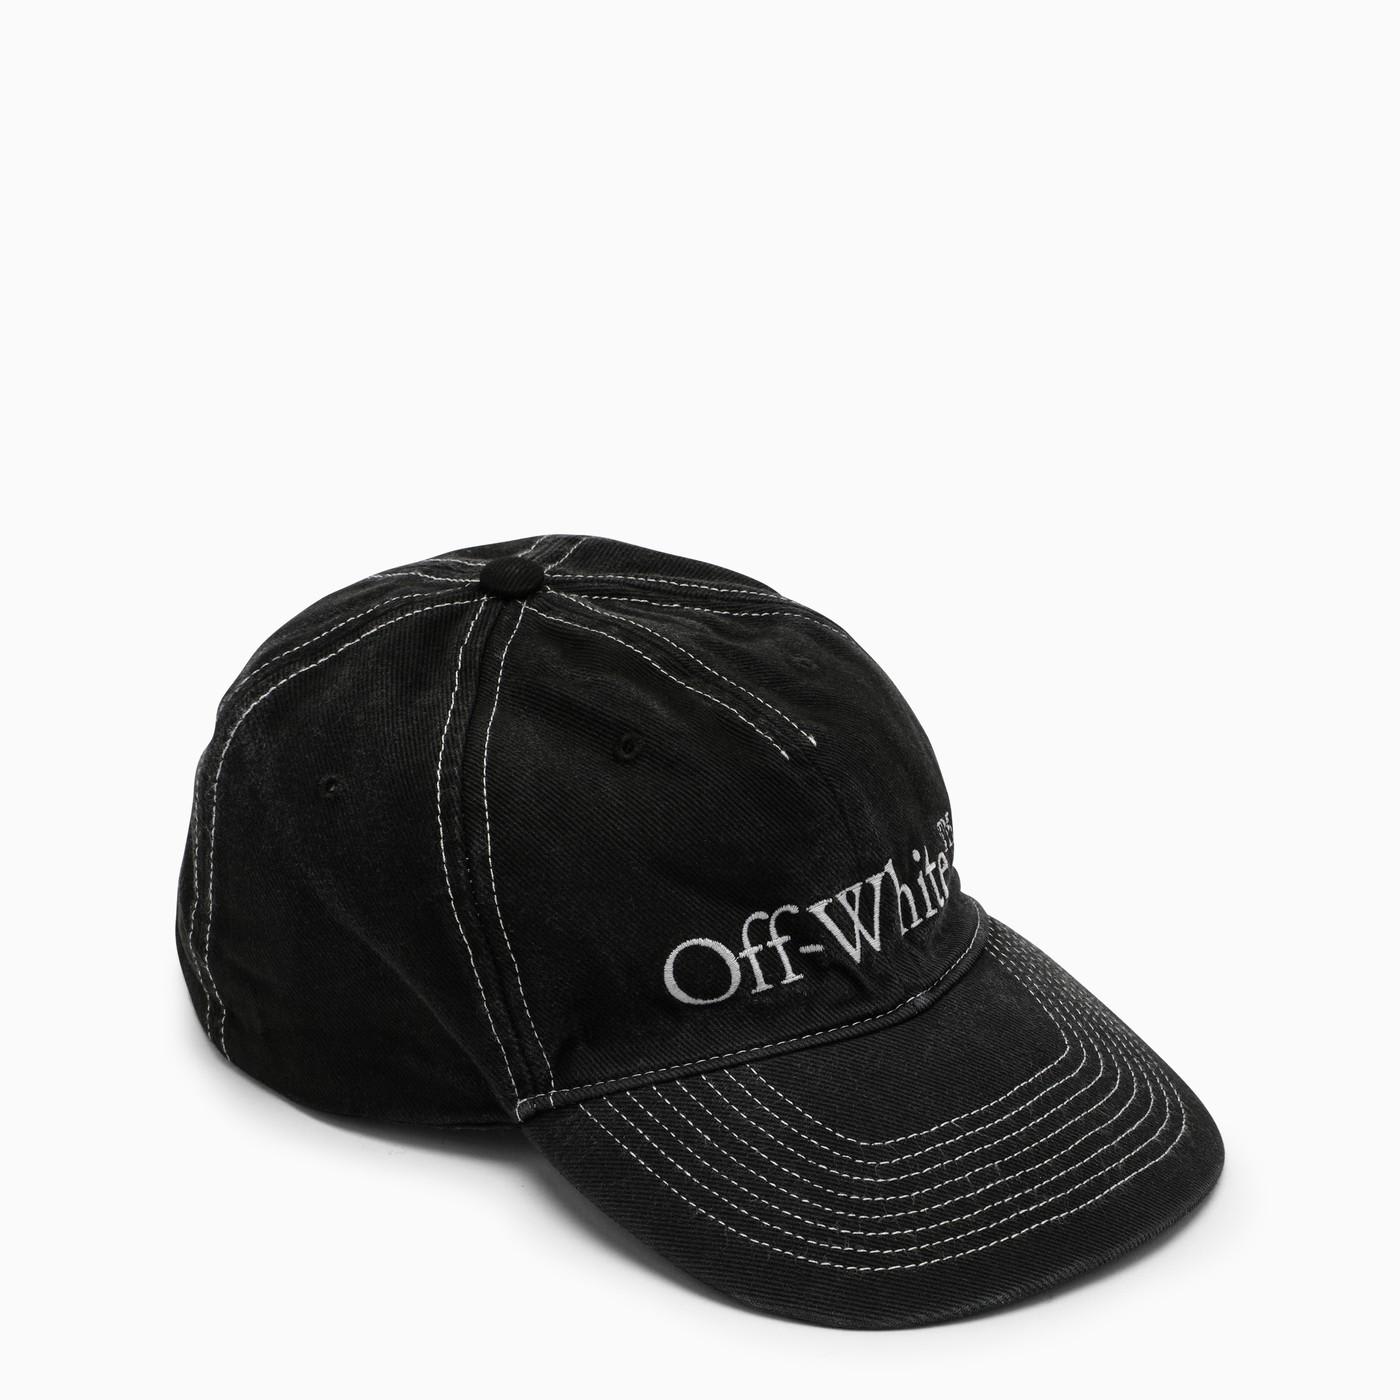 OFF-WHITE BLACK HAT WITH STITCHING